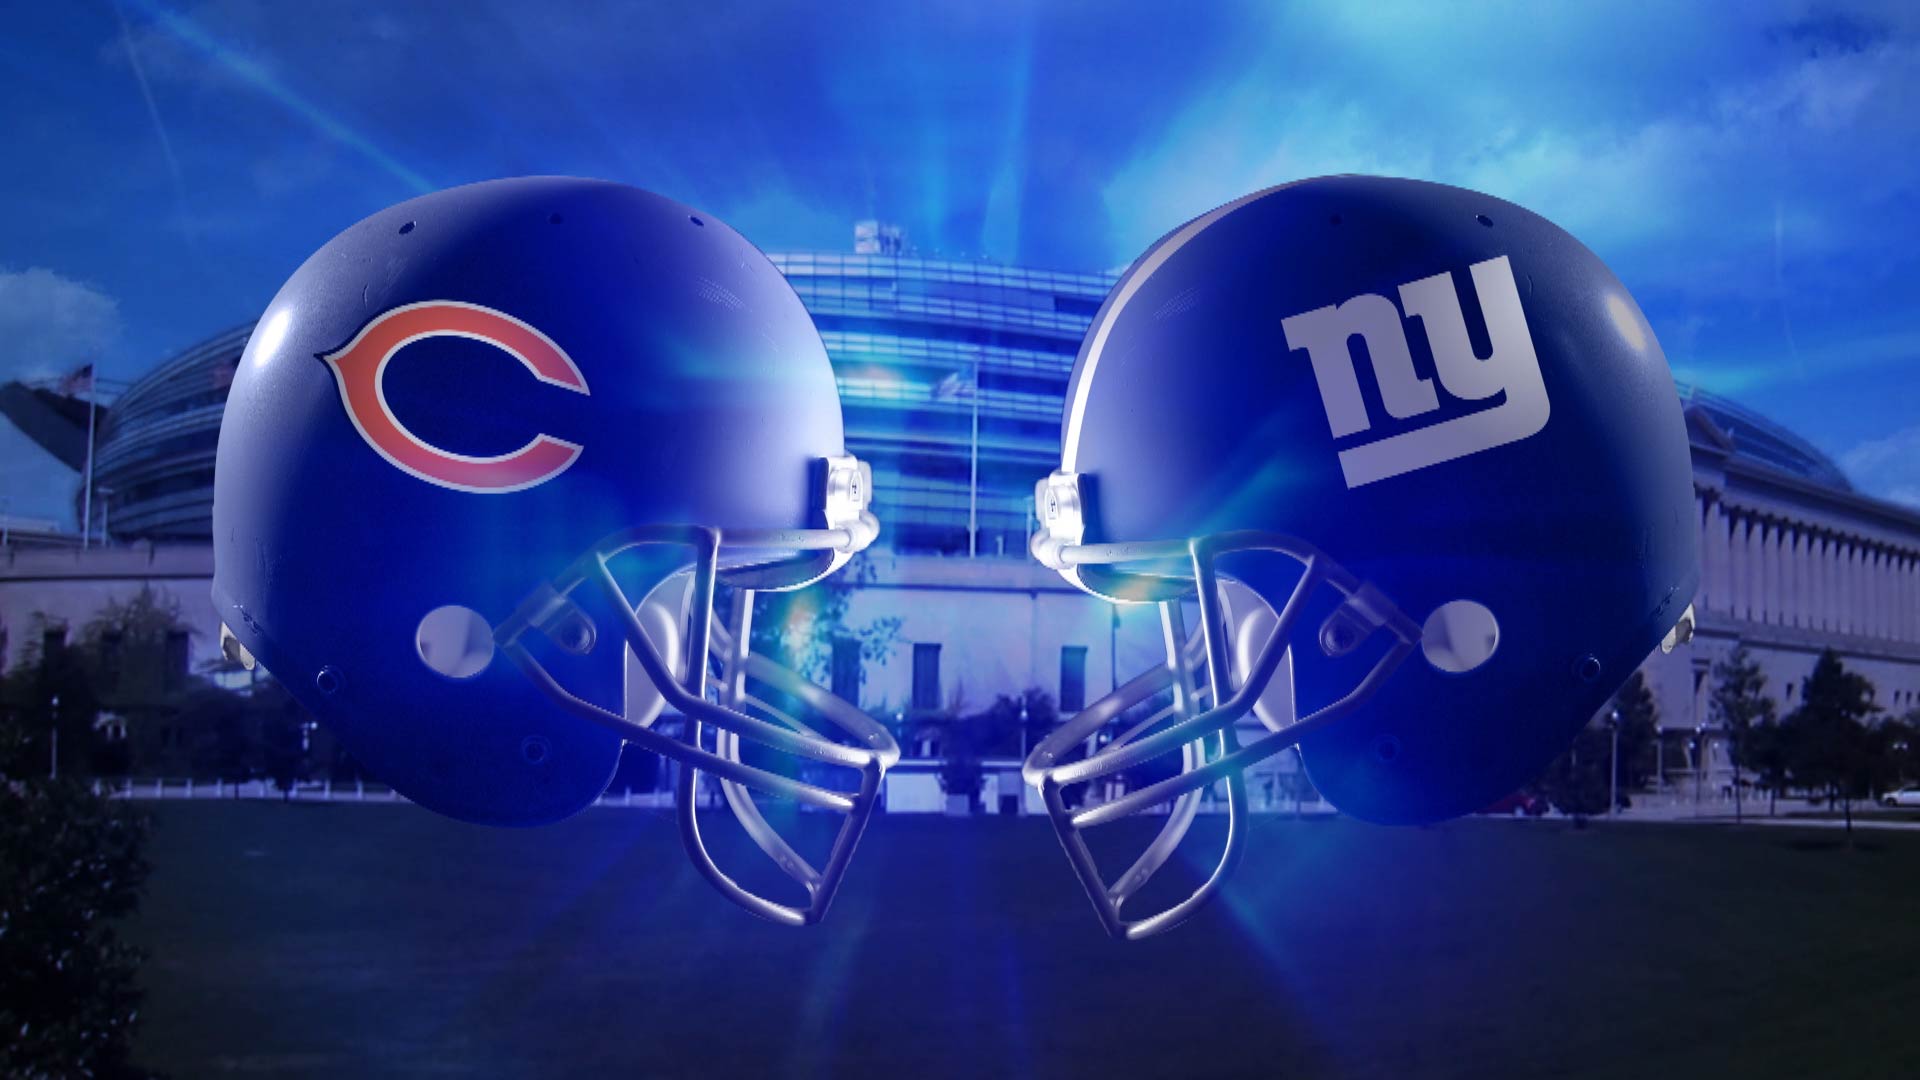 Bears vs. Giants Preview: Chicago Looks to Build on Last Week's